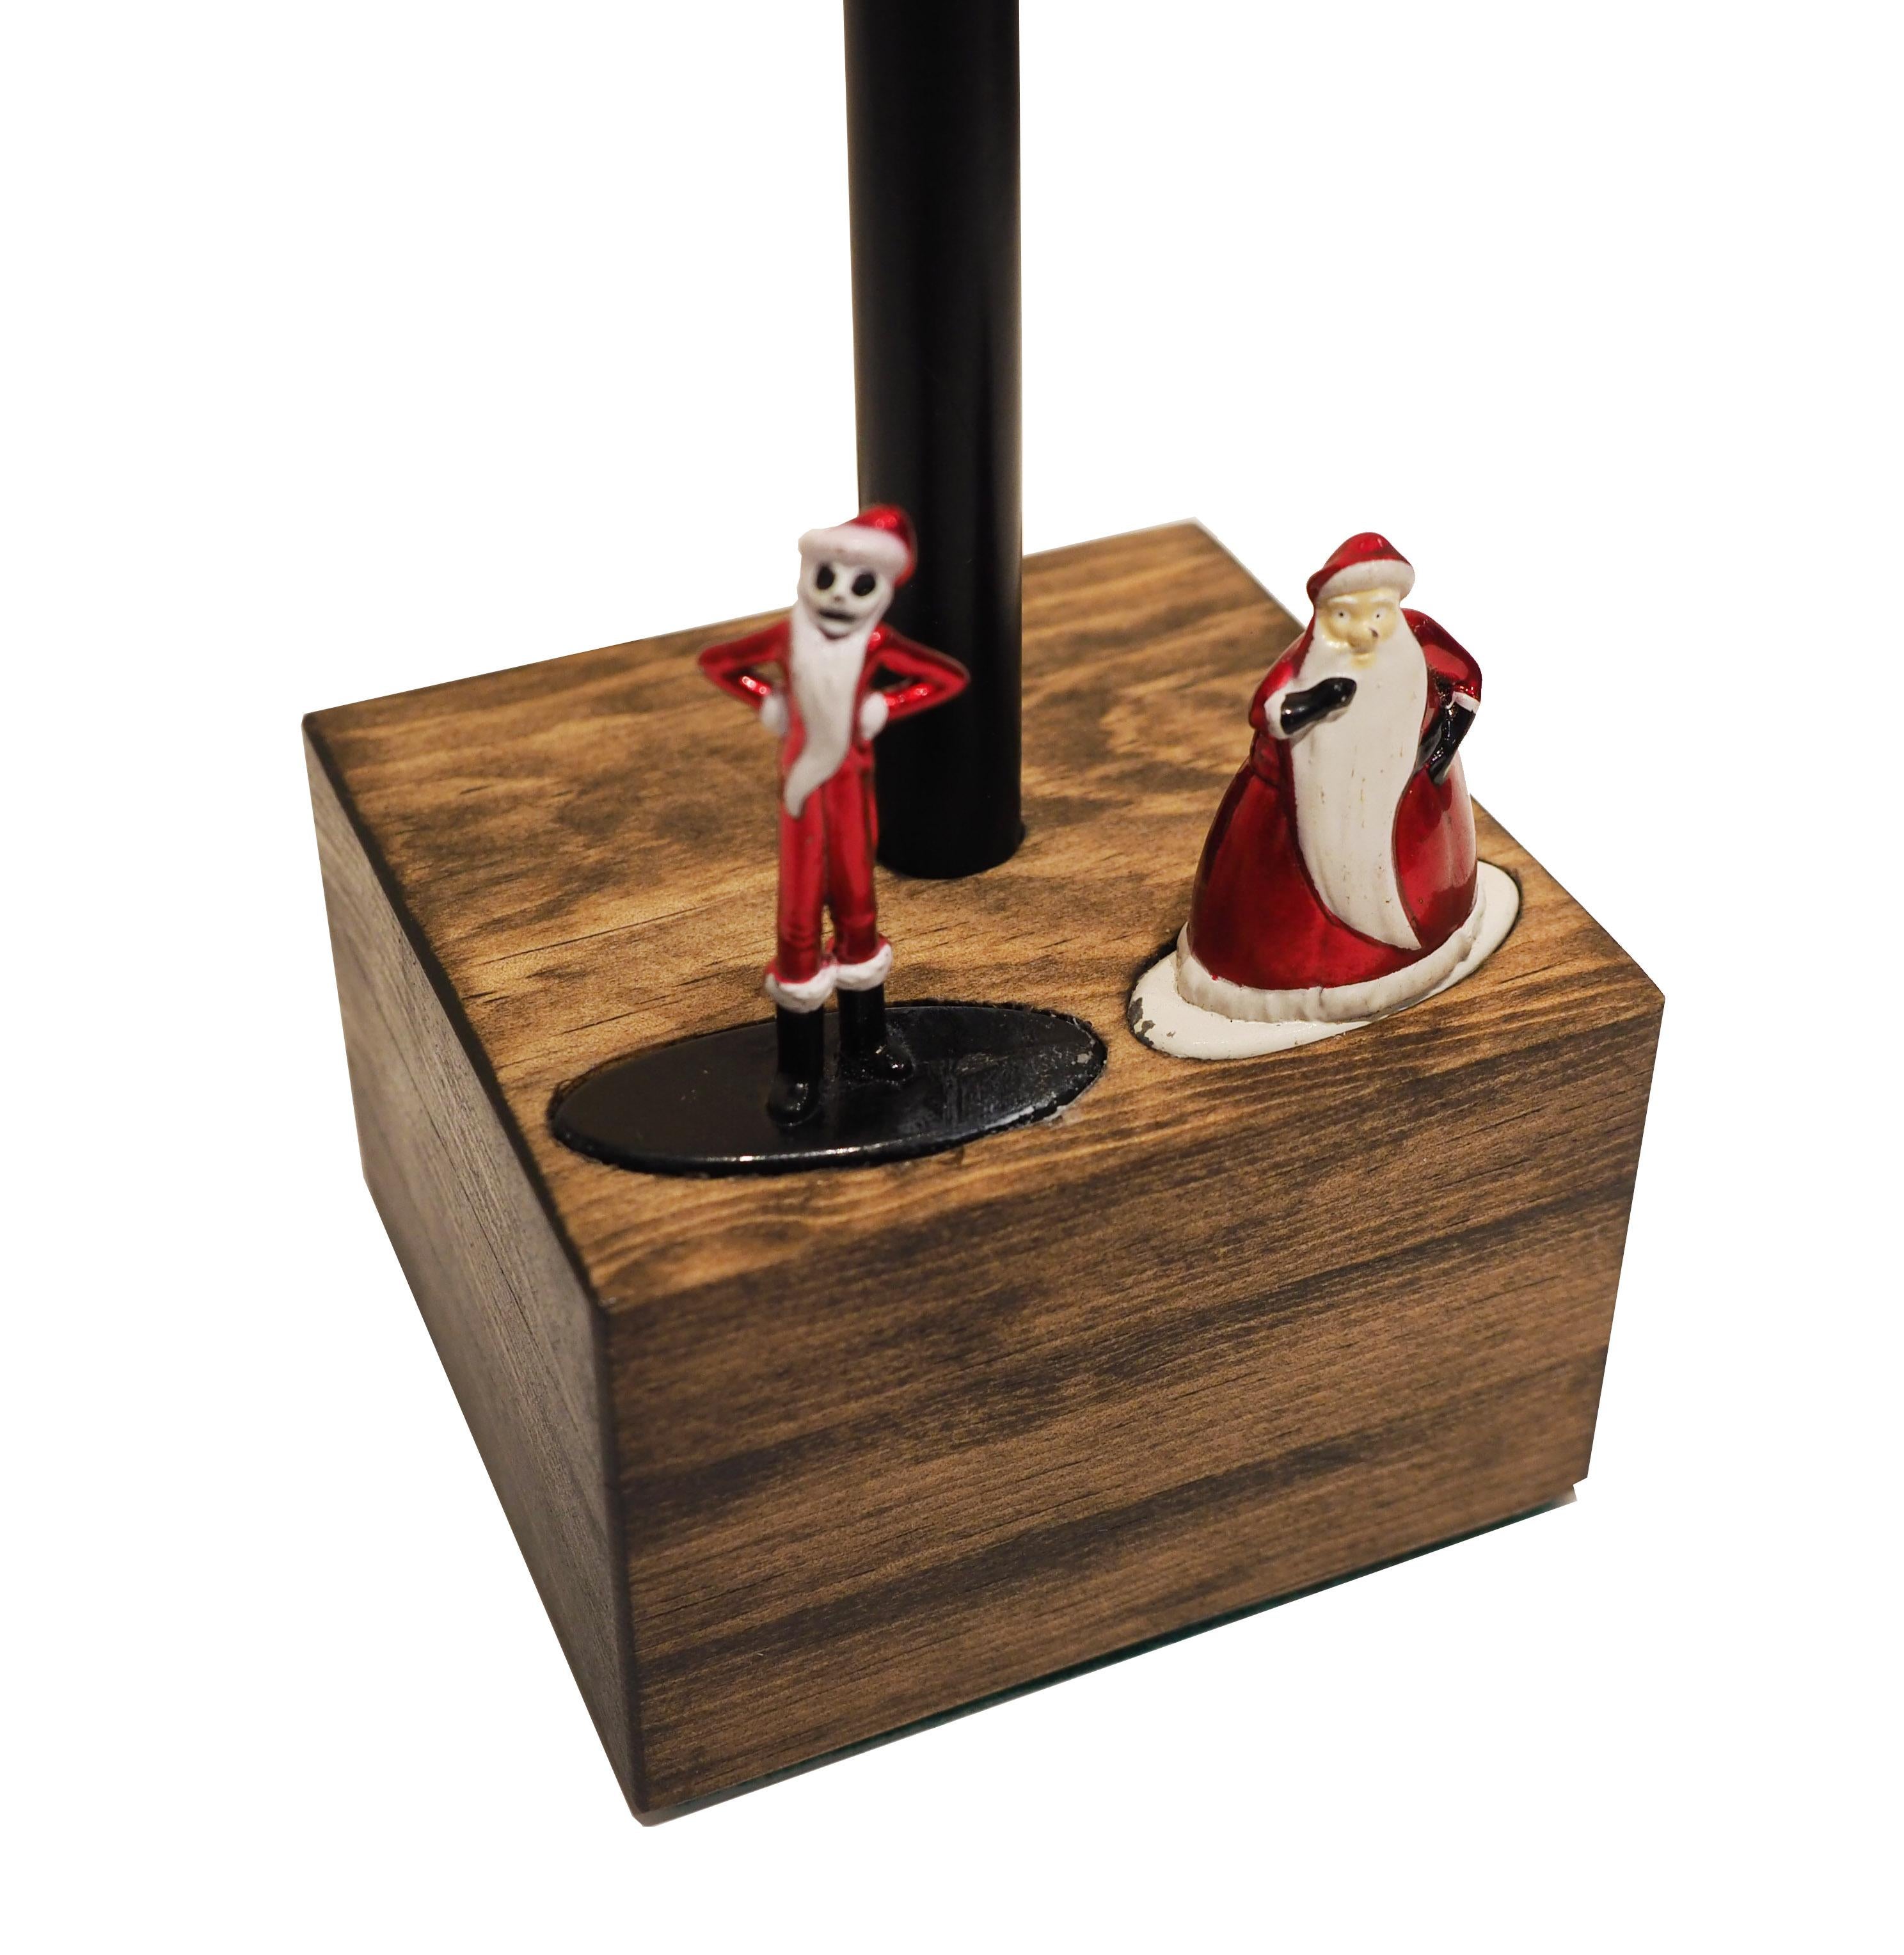 Limited set of touch lamps features a handcrafted hardwood base (walnut, poplar, and ash) inlaid with authentic vintage Nightmare Before Christmas die-cast metal figurines. Touch each figurine to adjust to three levels of brightness! 

(40-watt